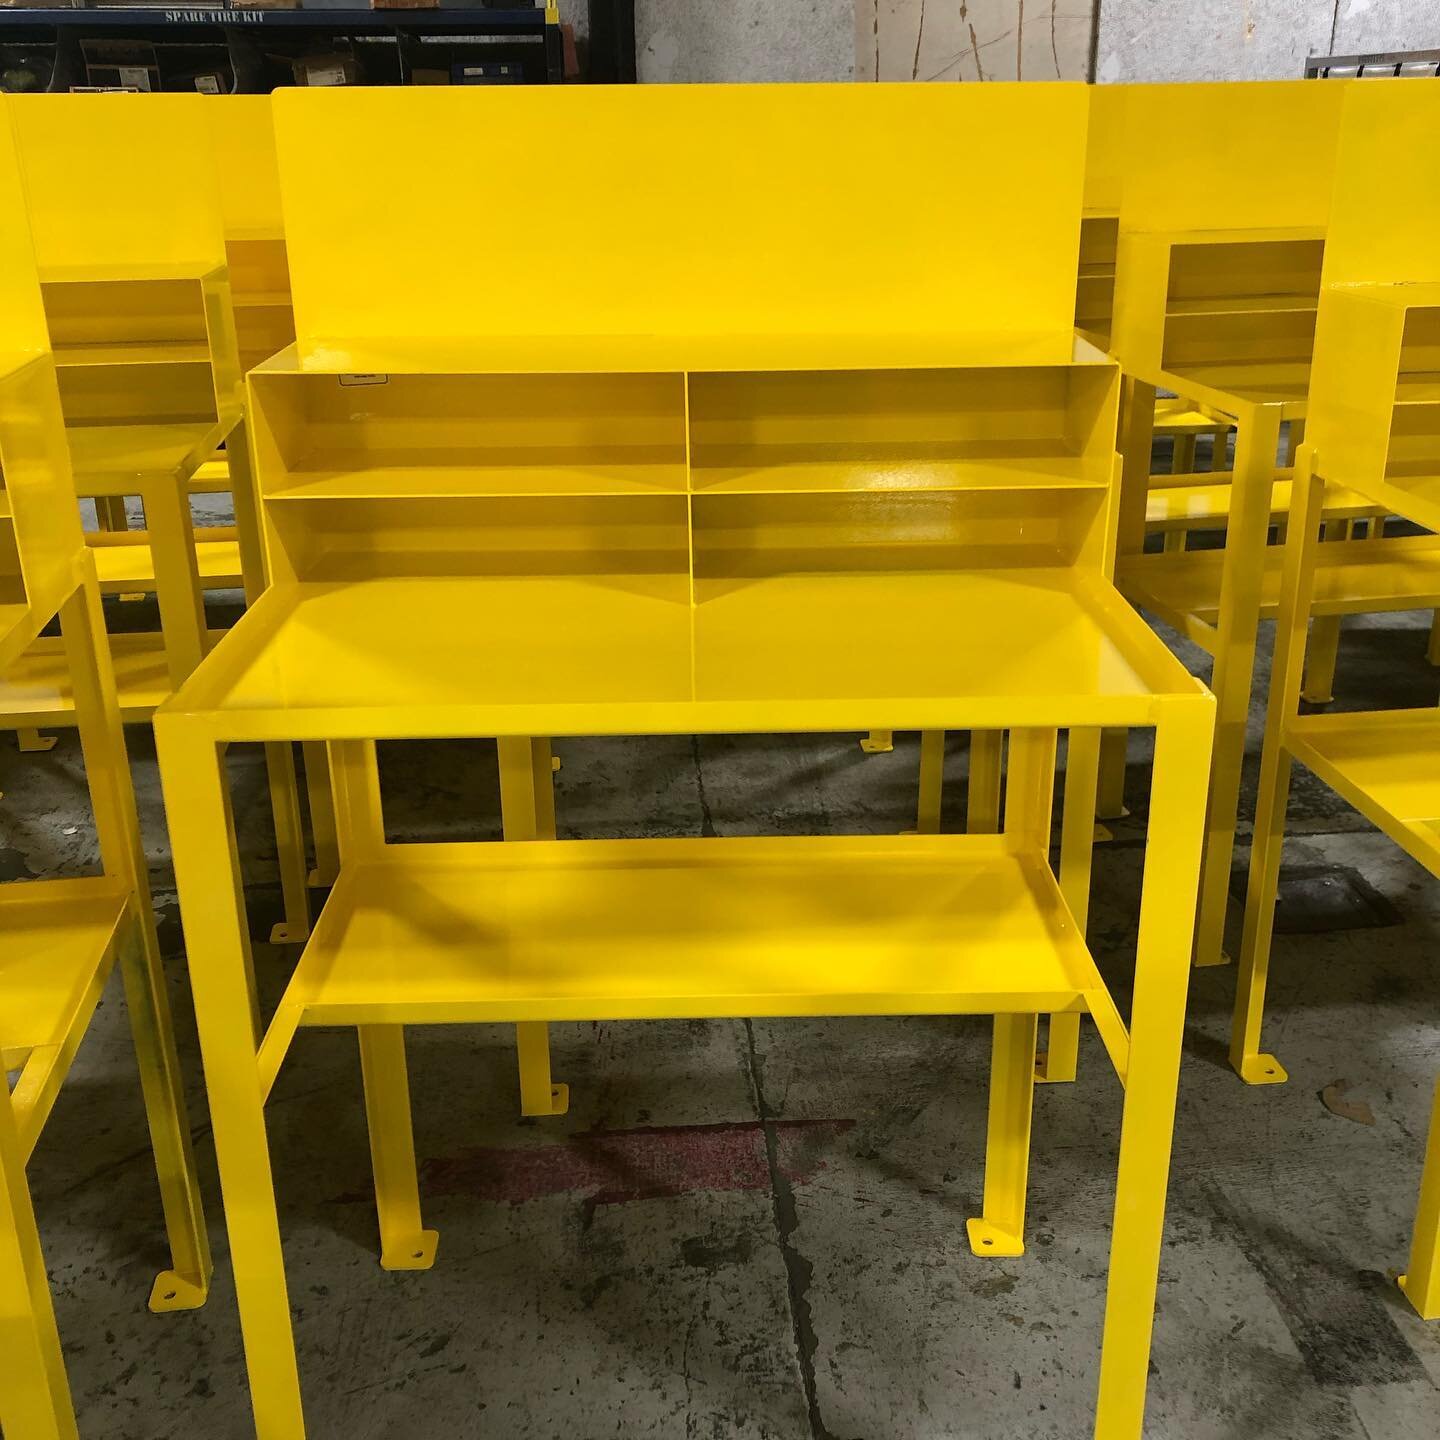 Powder Coated Work Stations ready to ship to our customer.  #fabrication #powdercoating